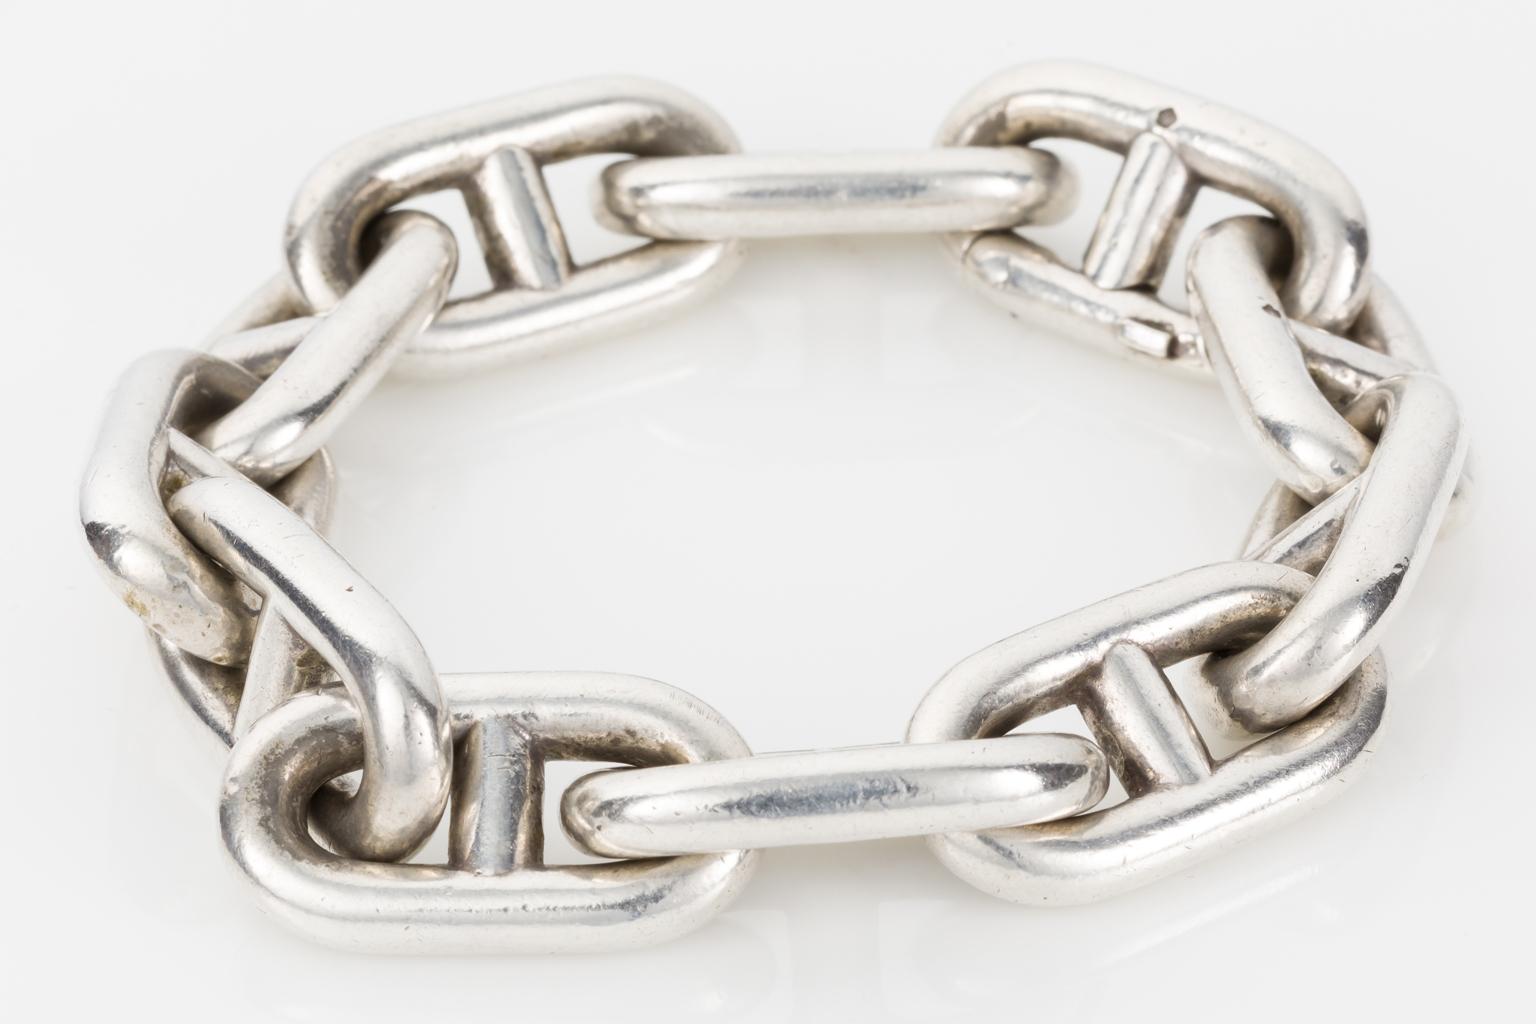 Hermes and Vintage - a great combination! This sensational anchor link chain in crafted from sterling silver and has such a heavy and bold look to it. 
Sits nicely on the wrist despite it being over 110 grams of solid silver.
A sought after style,